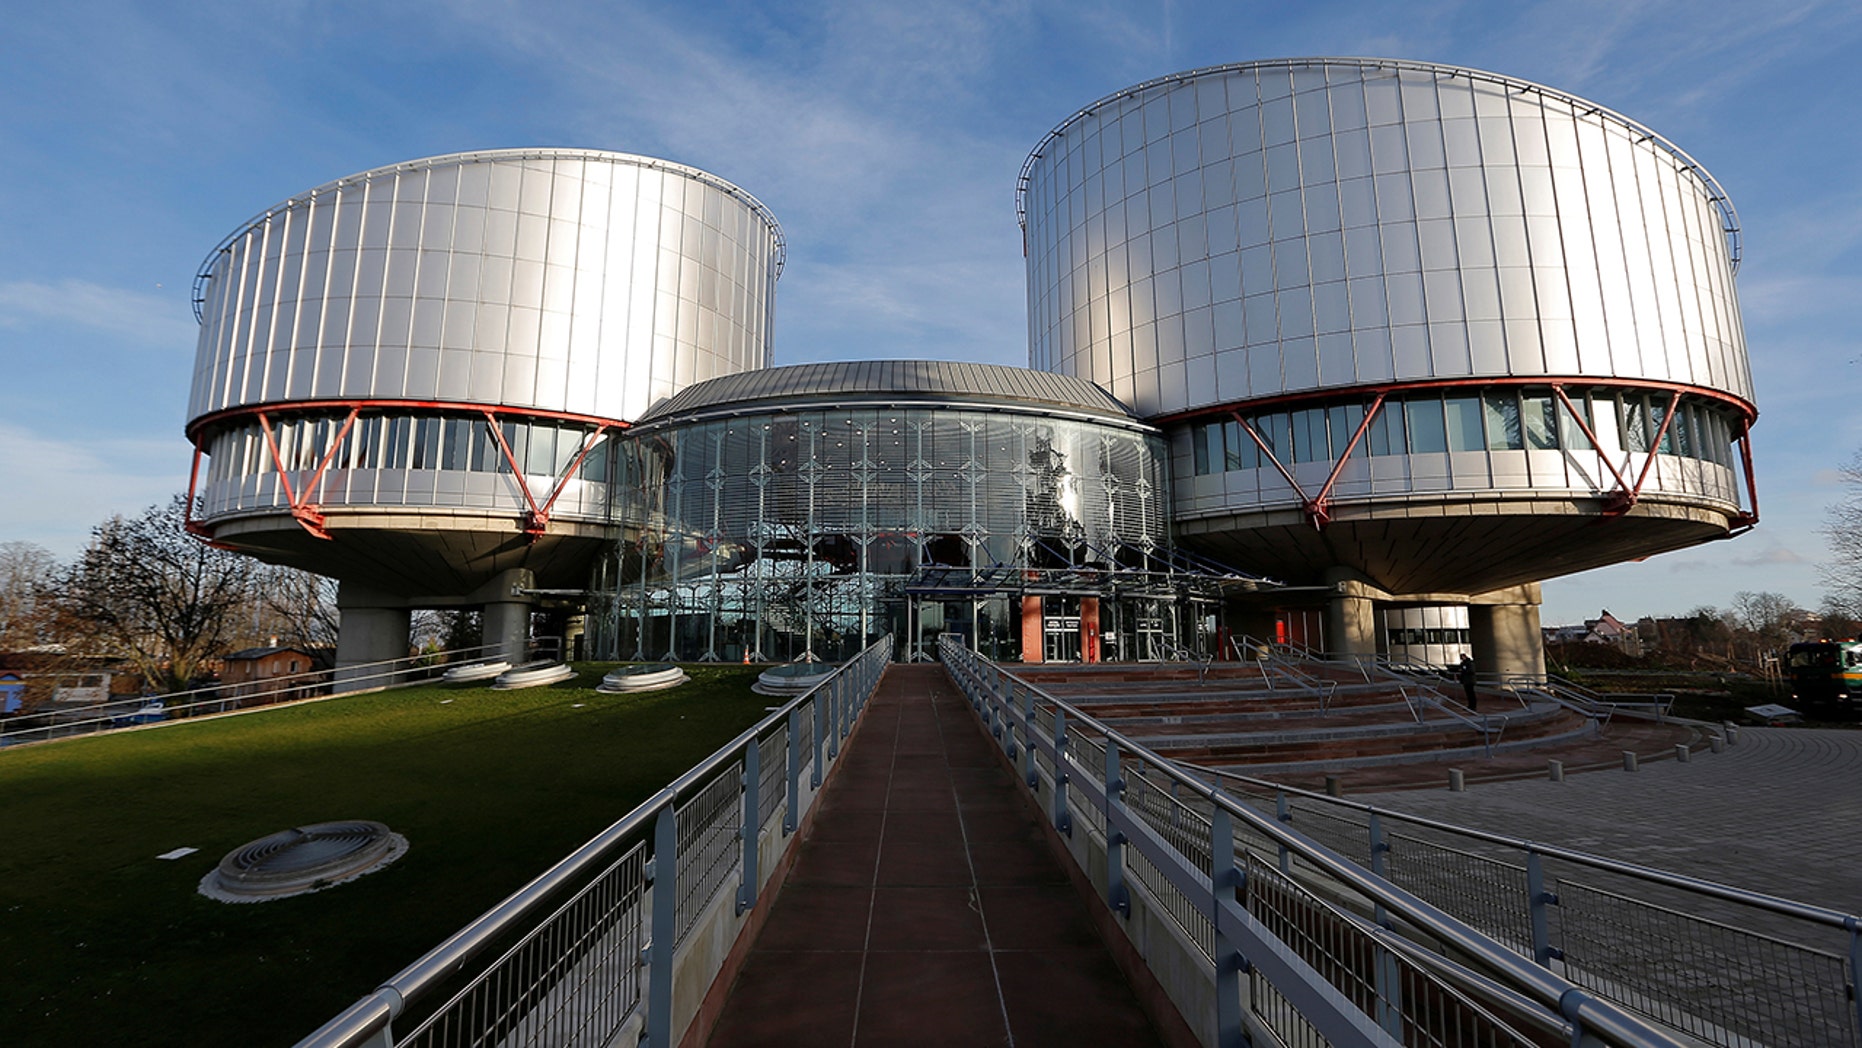 The European Court of Human Rights ruled that insulting the Prophet Muhammad does not fall under the purview of free speech. REUTERS/Vincent Kessler